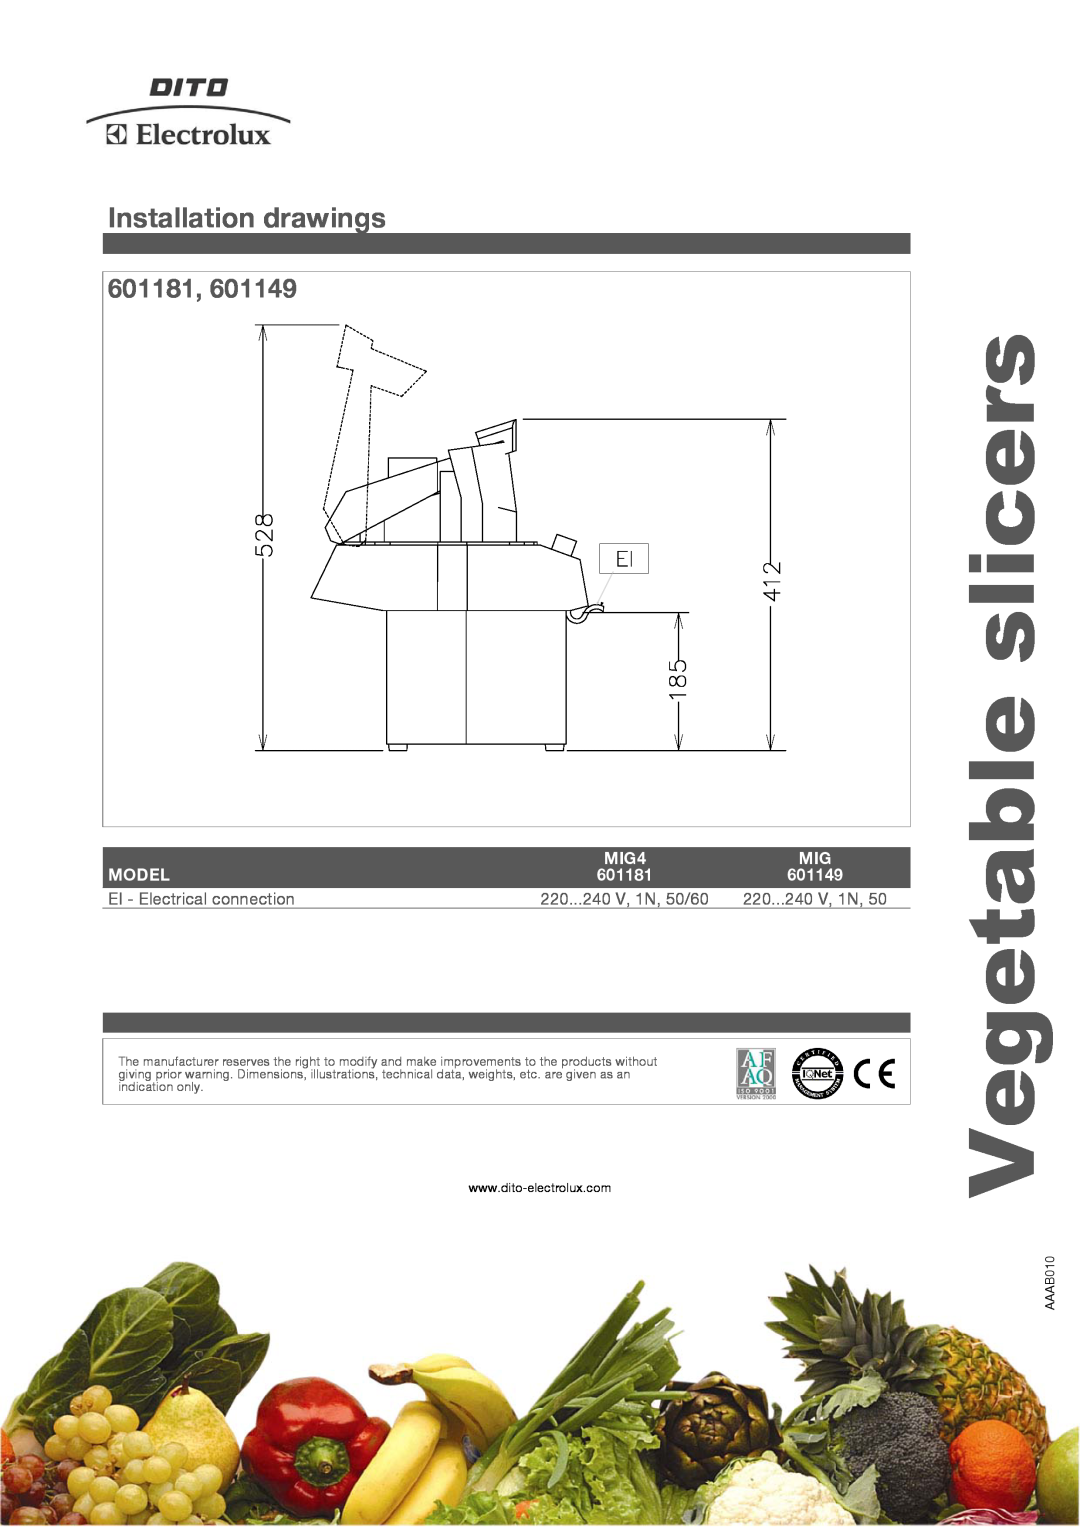 Electrolux 601149 manual Vegetable slicers, Installation drawings, 601181, MIG4, Model, EI - Electrical connection, AAAB010 